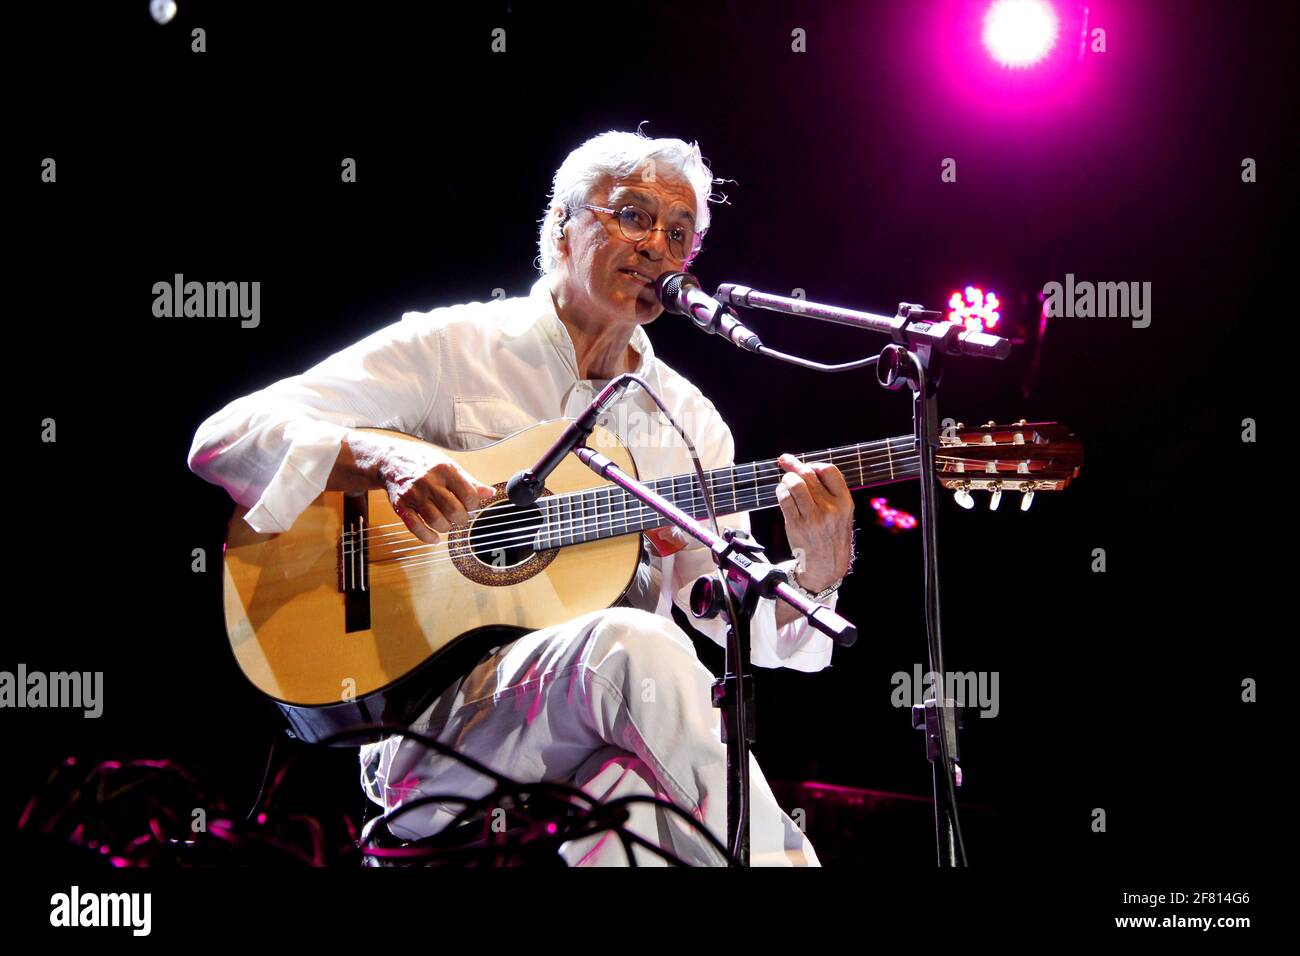 santo amaro bahia / brazil - january 25, 2013: Caetano Veloso seen during presentation at the feast of Our Lady of Purification. *** Local Caption *** Stock Photo